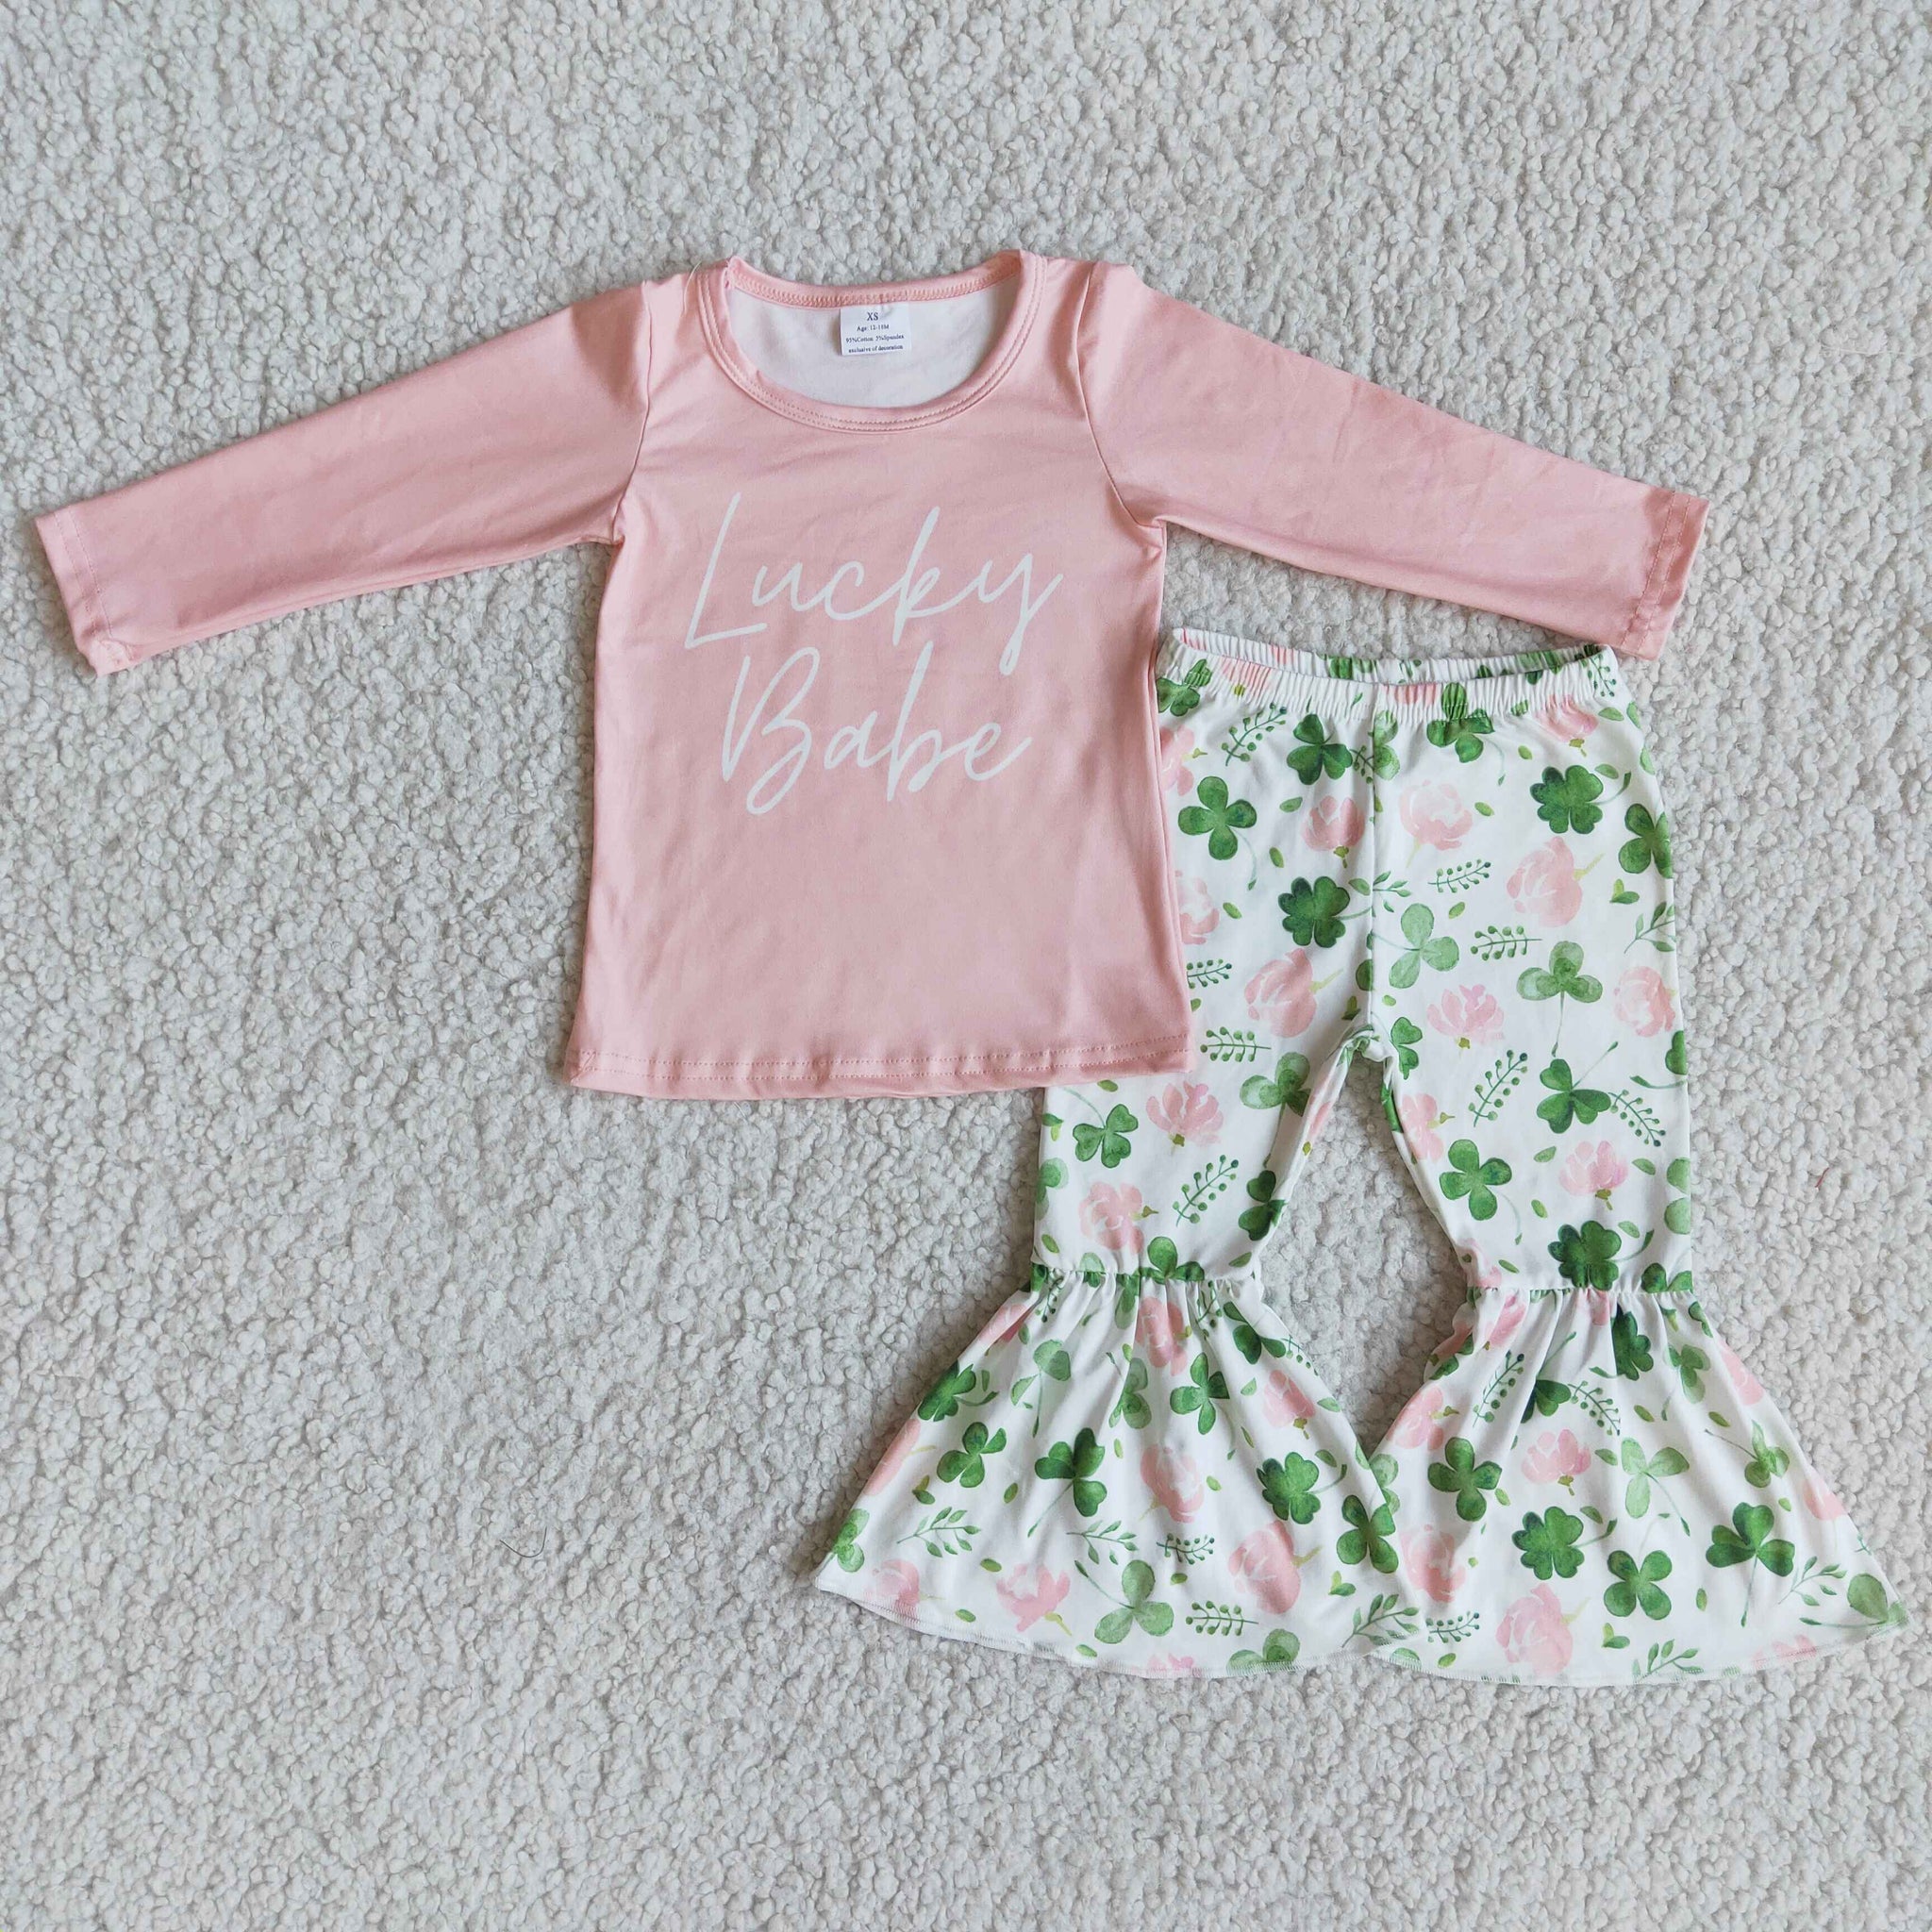 6 B2-25 toddler girl clothes St. Patrick lucky babe bells set